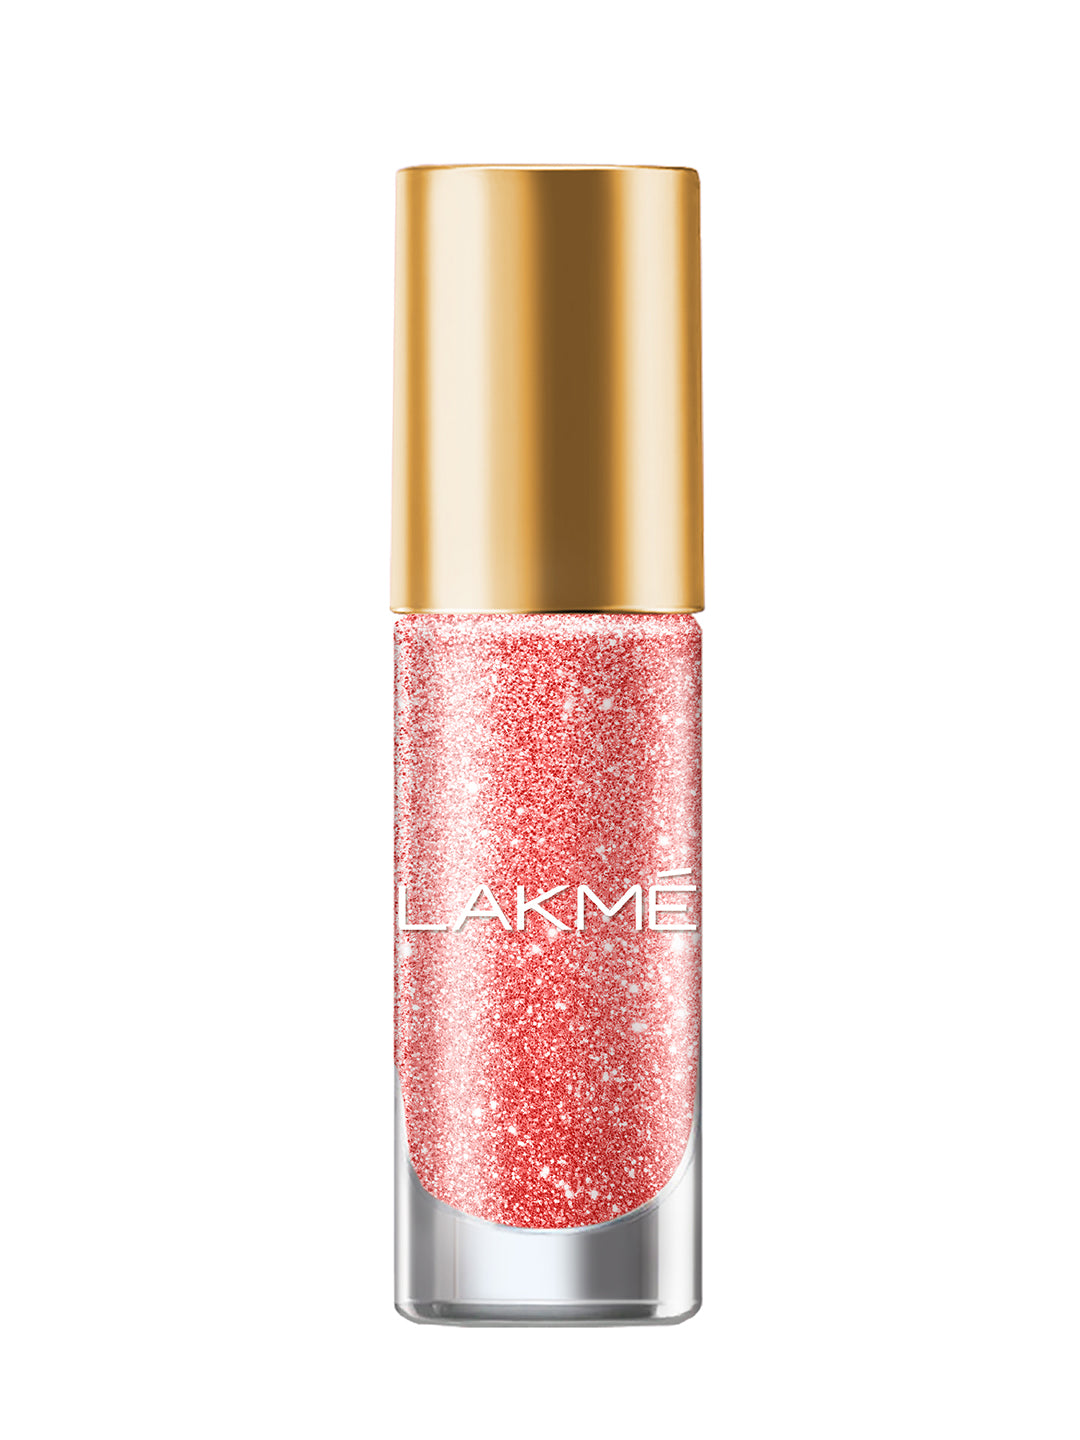 Lakme Gel Stylist Nail Polish in Tomato Tango : Review, Price, Swatches and  NOTD - Budget Belleza | Indian Beauty Blog | Makeup Looks | Product Reviews  | Brands | Swatches